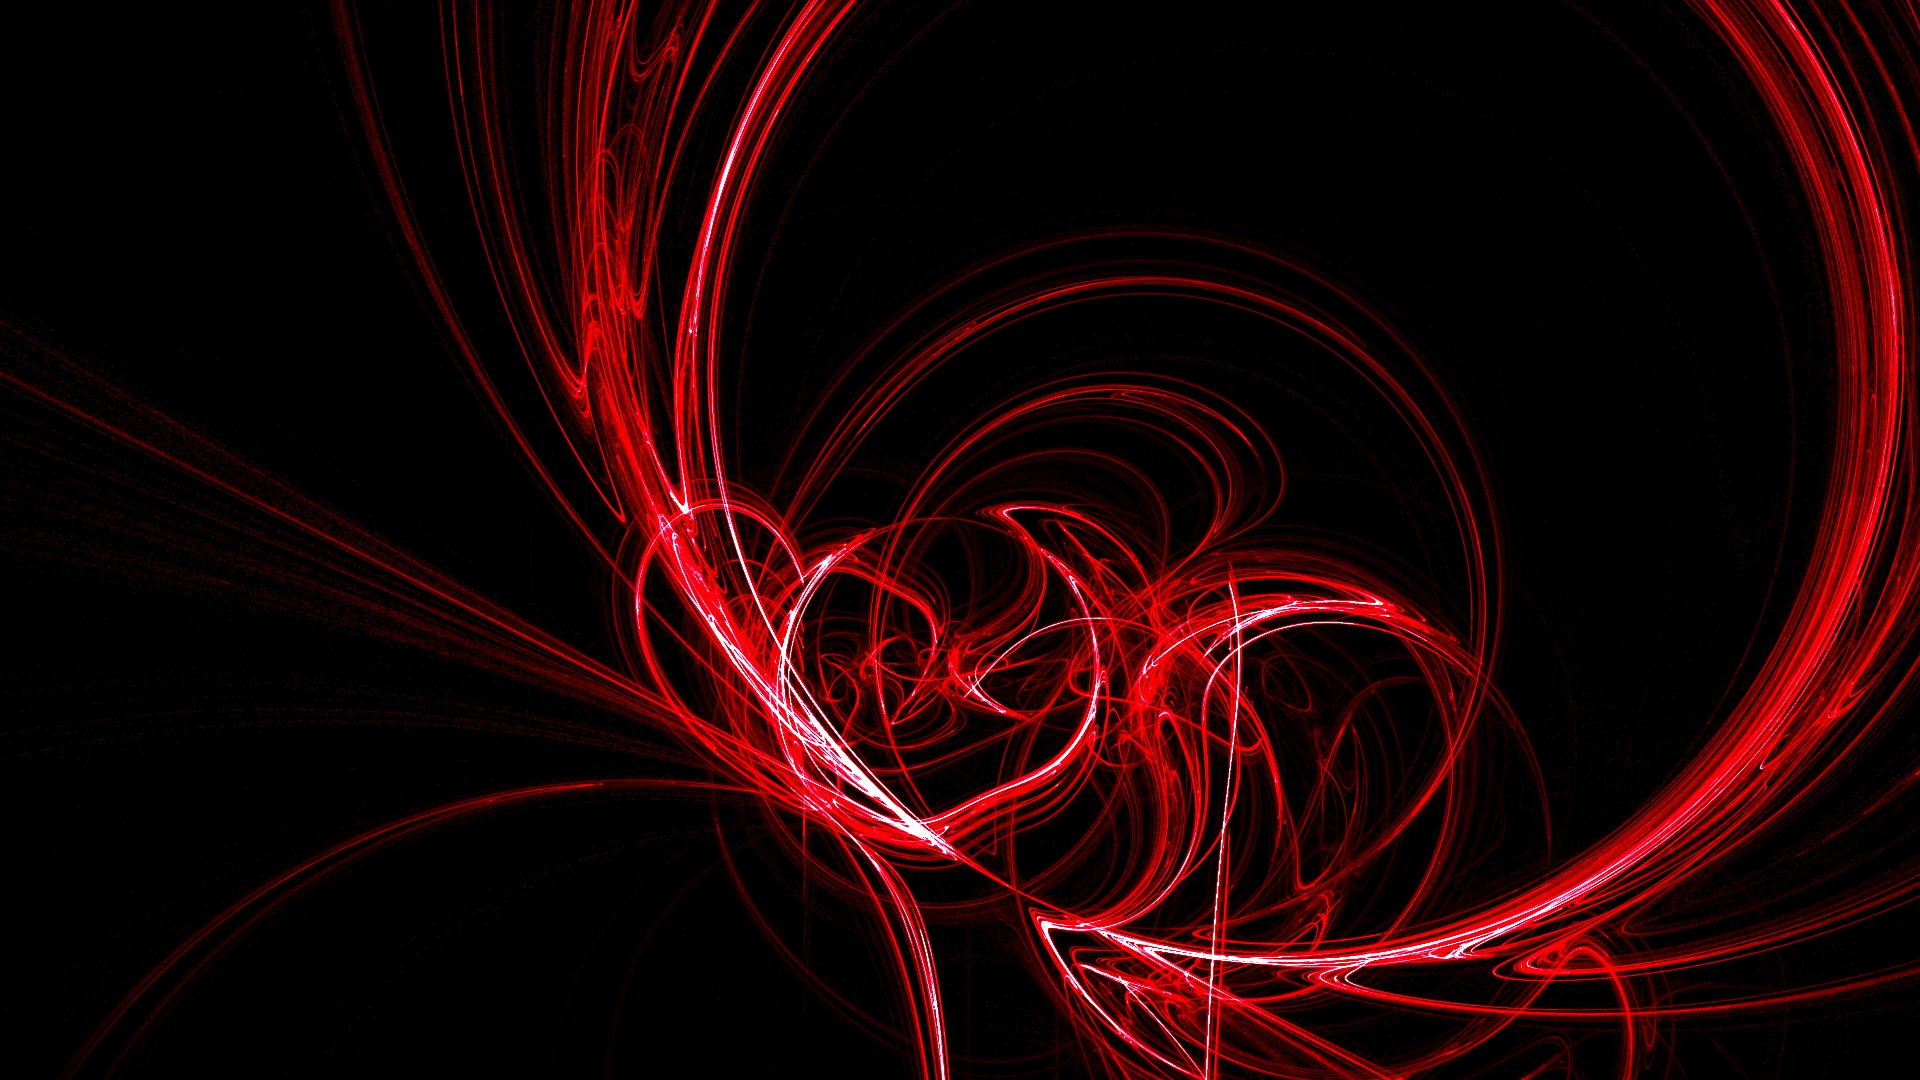 Abstract Wallpaper Red Image